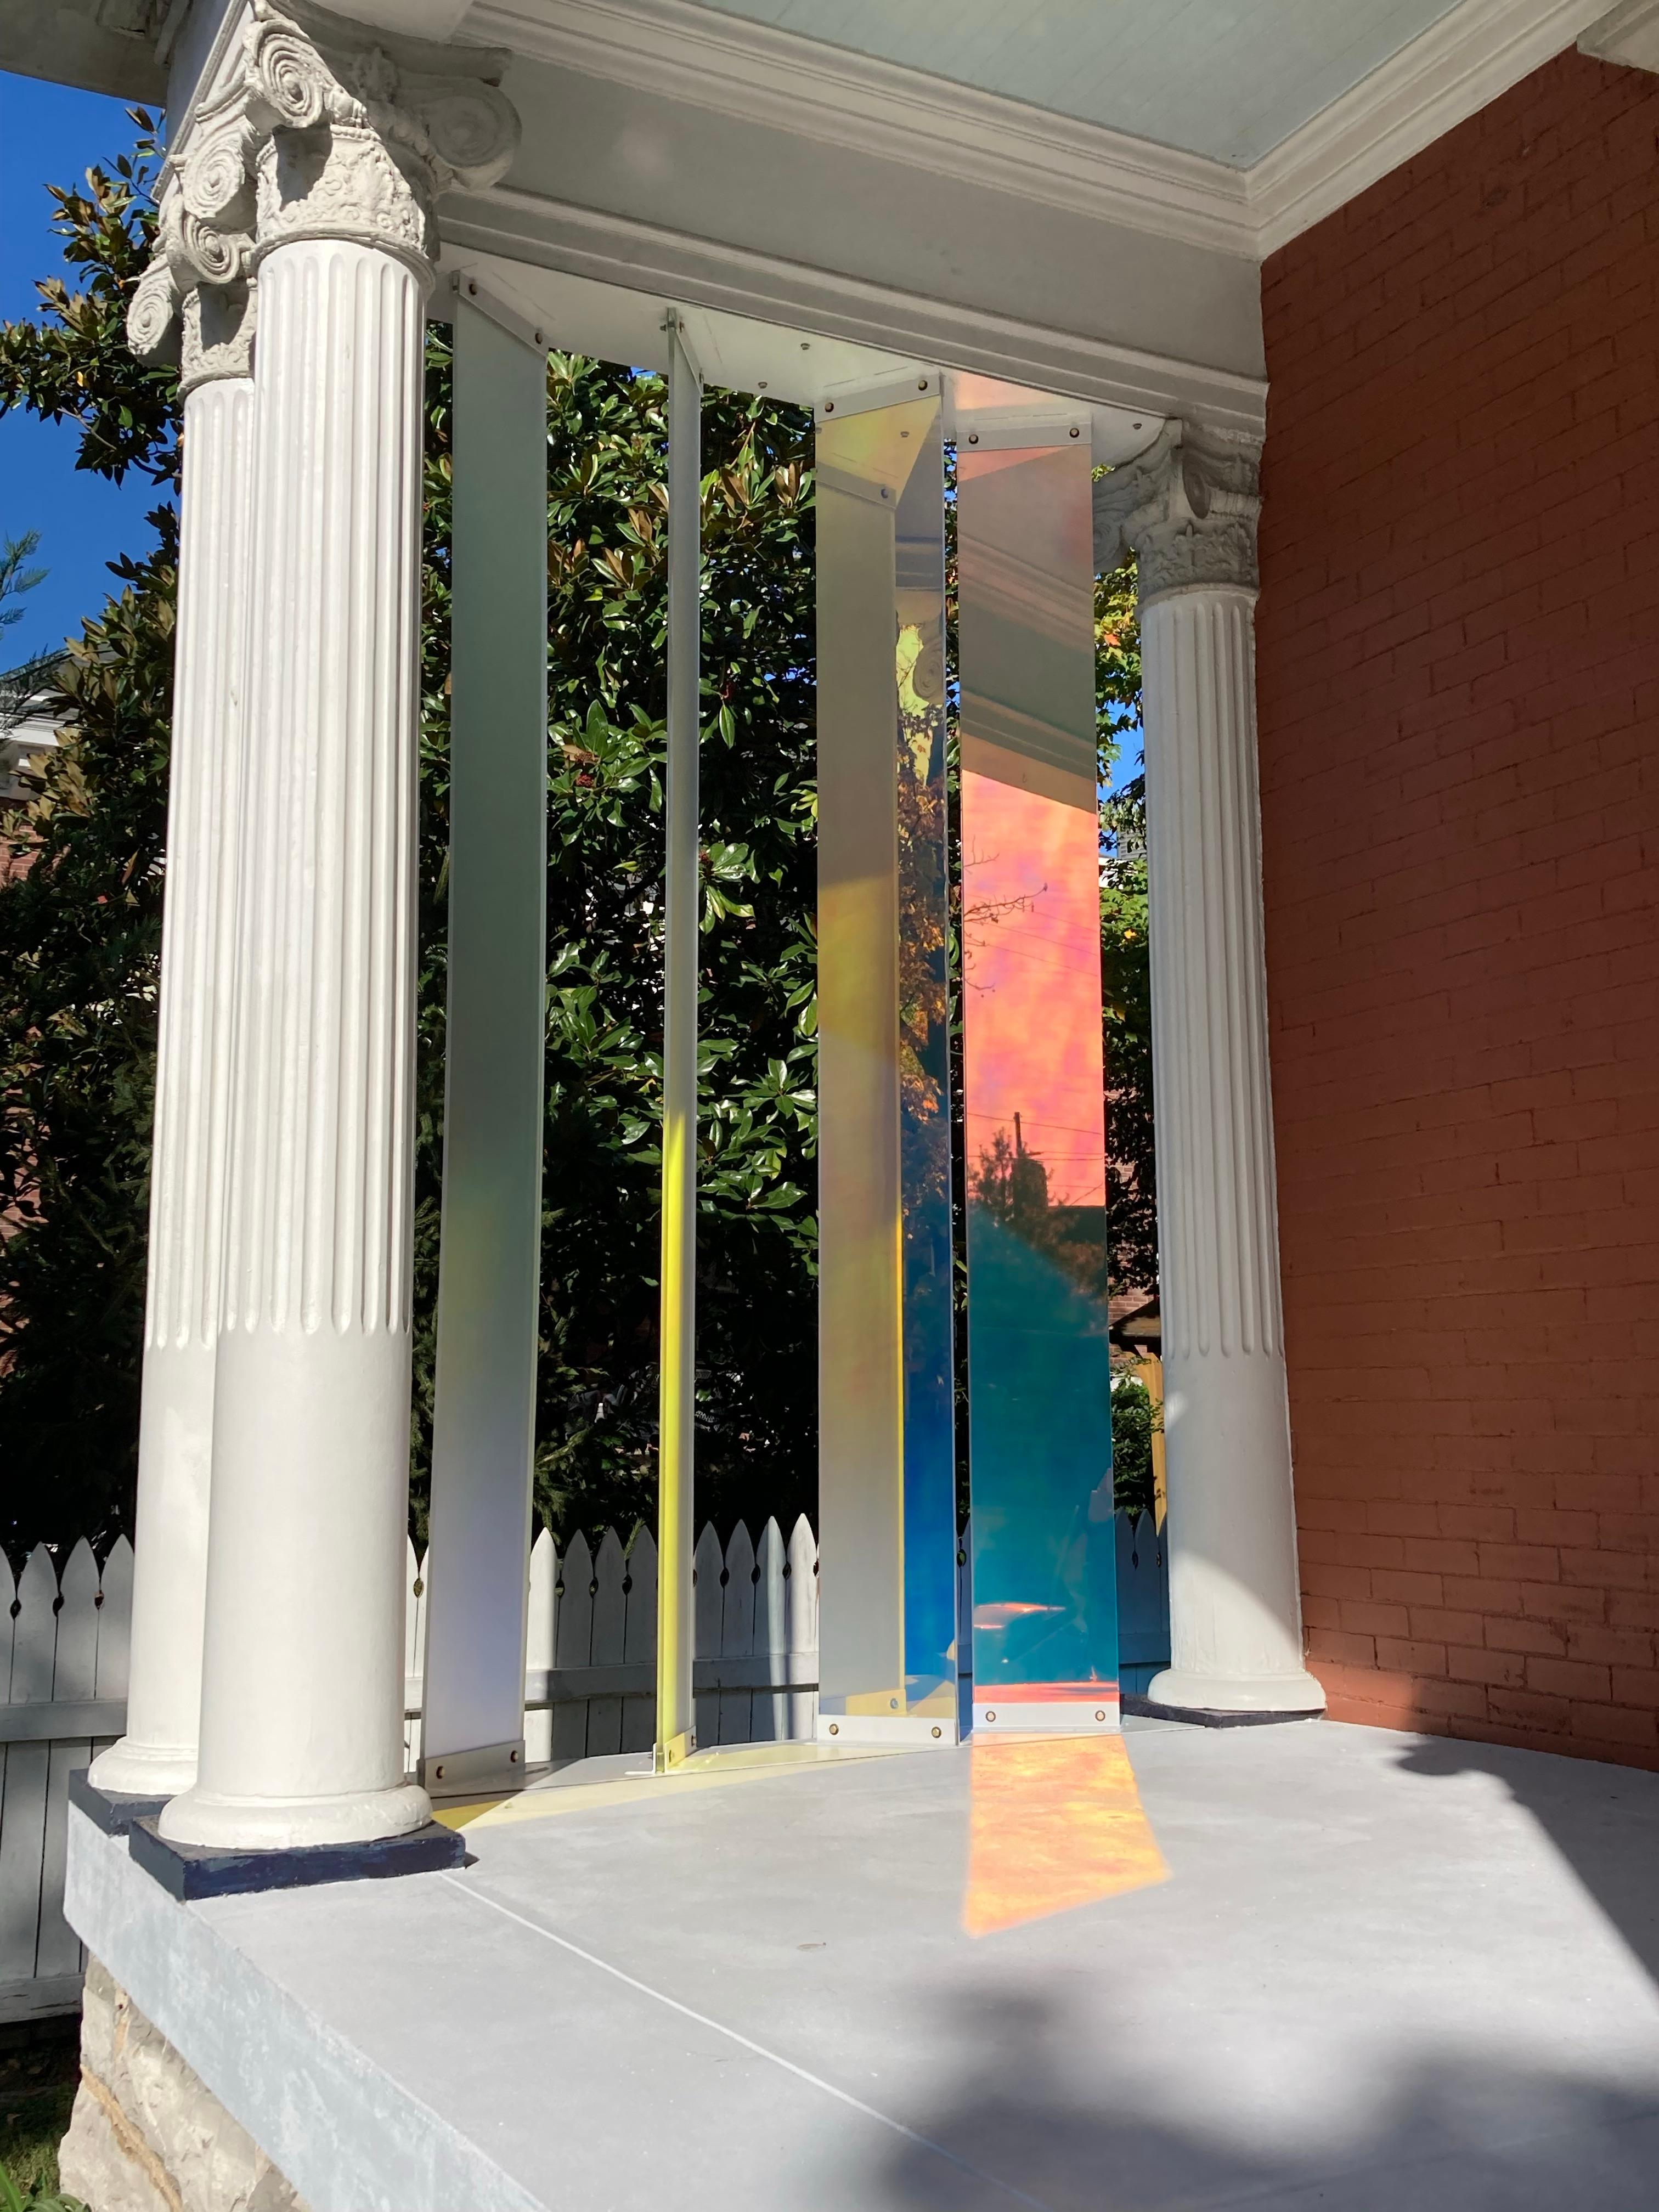 The artist works directly with the collector through the gallery to create commissioned based site specific installations such as Light Support listed here.

This ethereal installation titled Light Support, installed at a private residence, consists